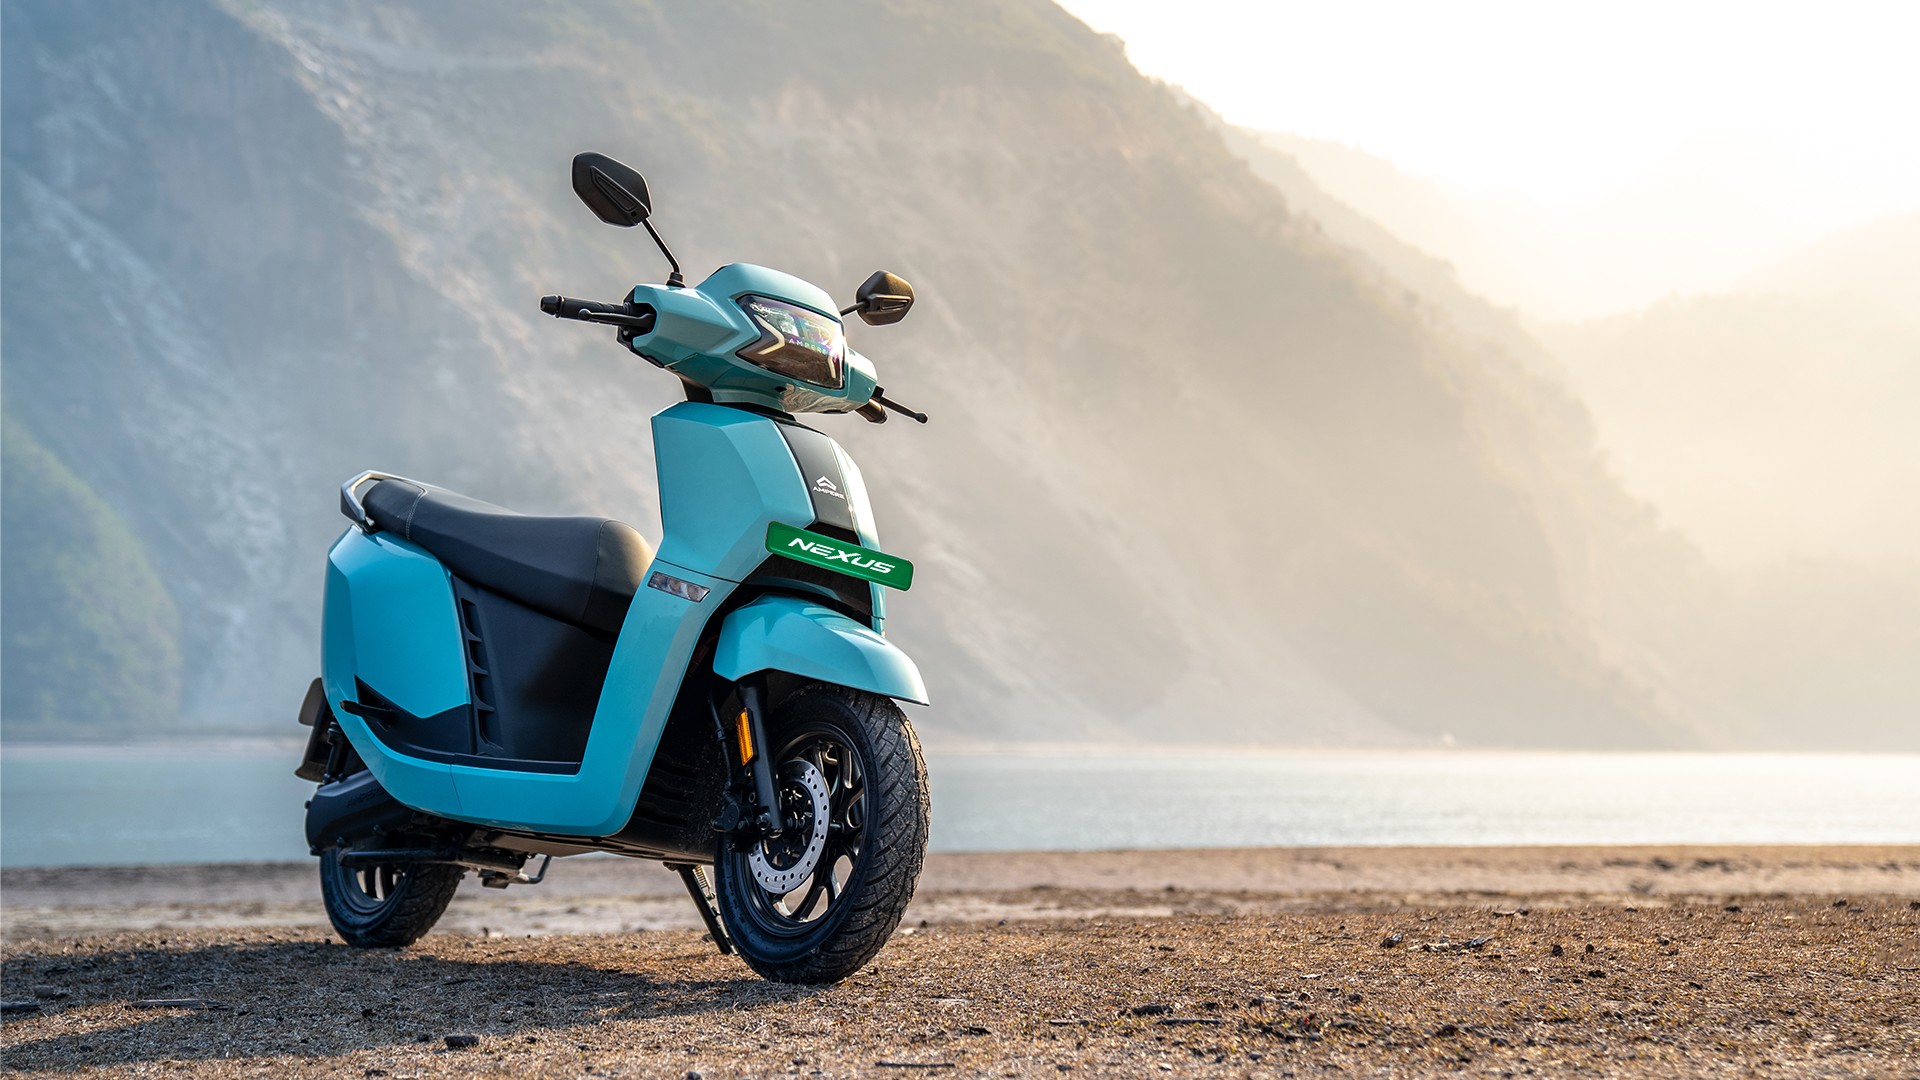 The Ampere Nexus gets a slender frame and is designed as a family e-scooter with a flat floorboard and a large seat